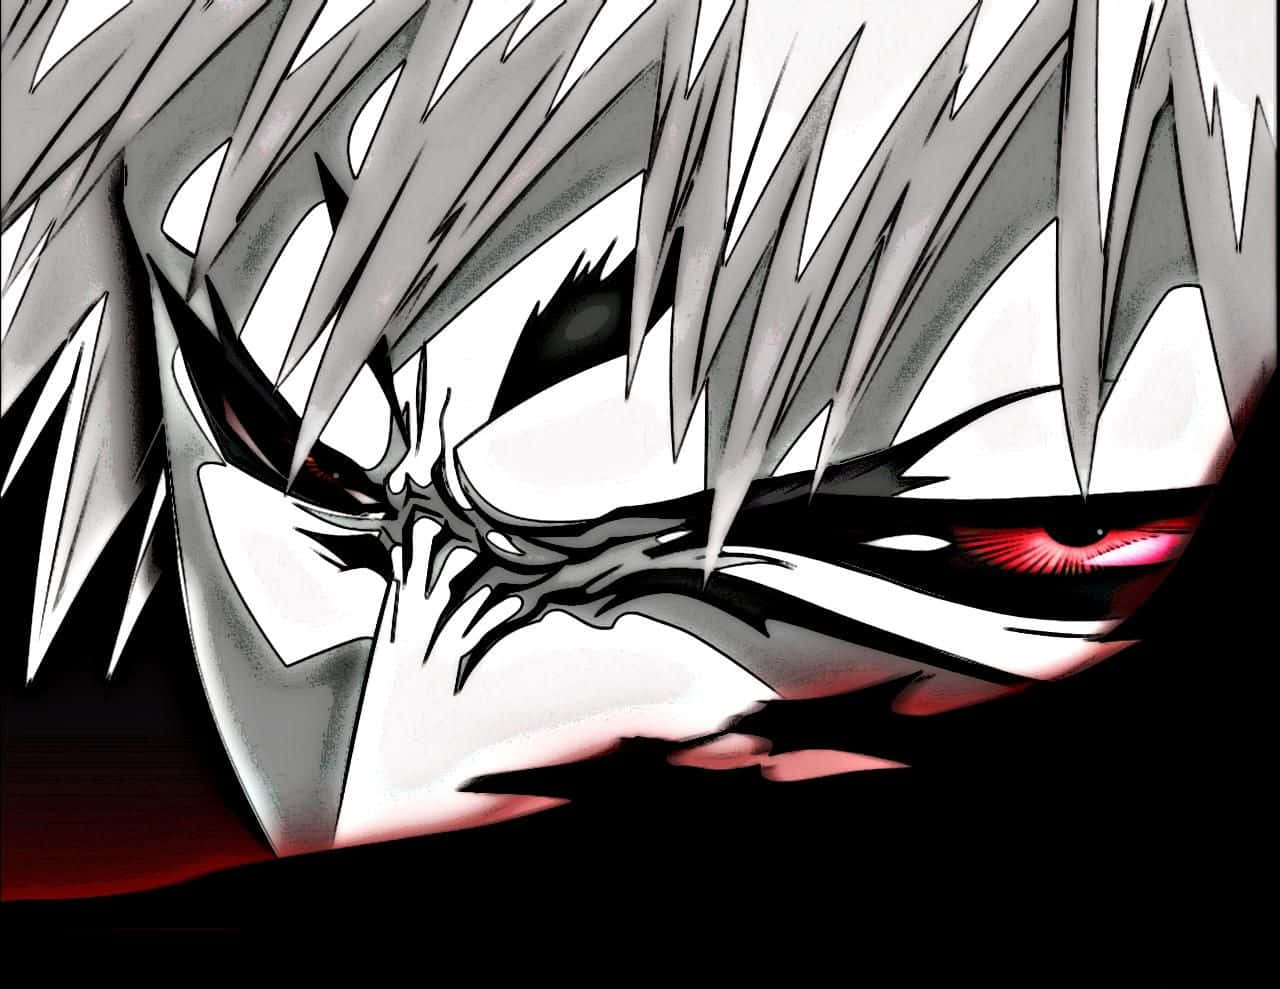 join the battle of Ichigo and his allies in the world of Bleach.